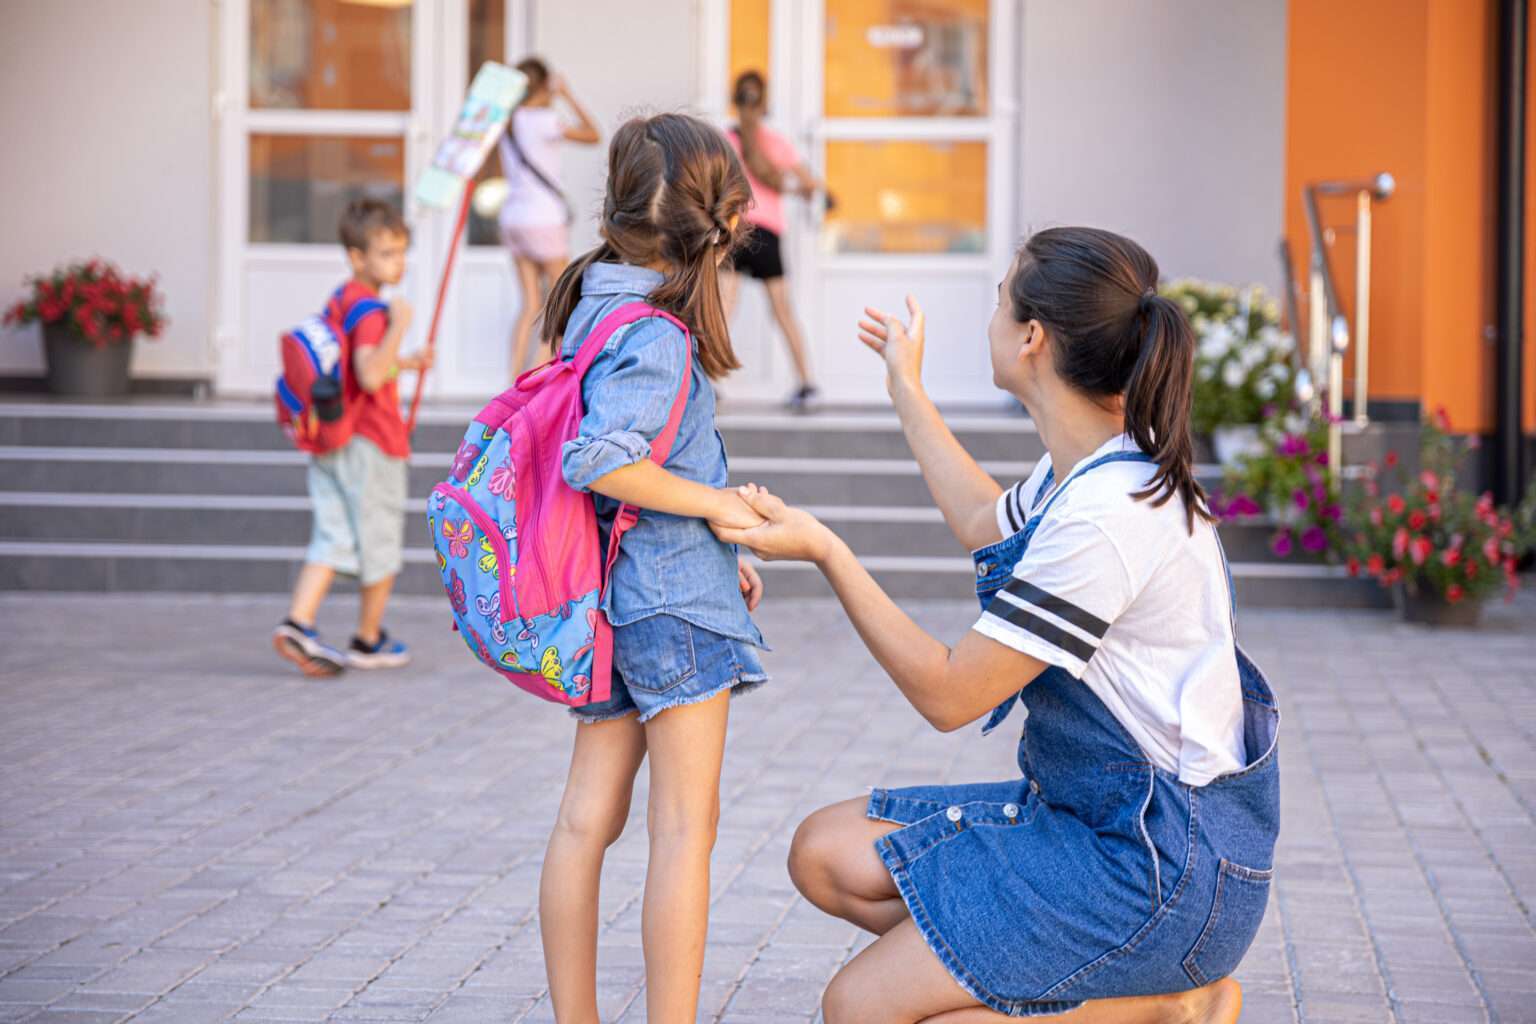 mom-morally-supports-the-daughter-holding-hands-accompanies-student-to-school